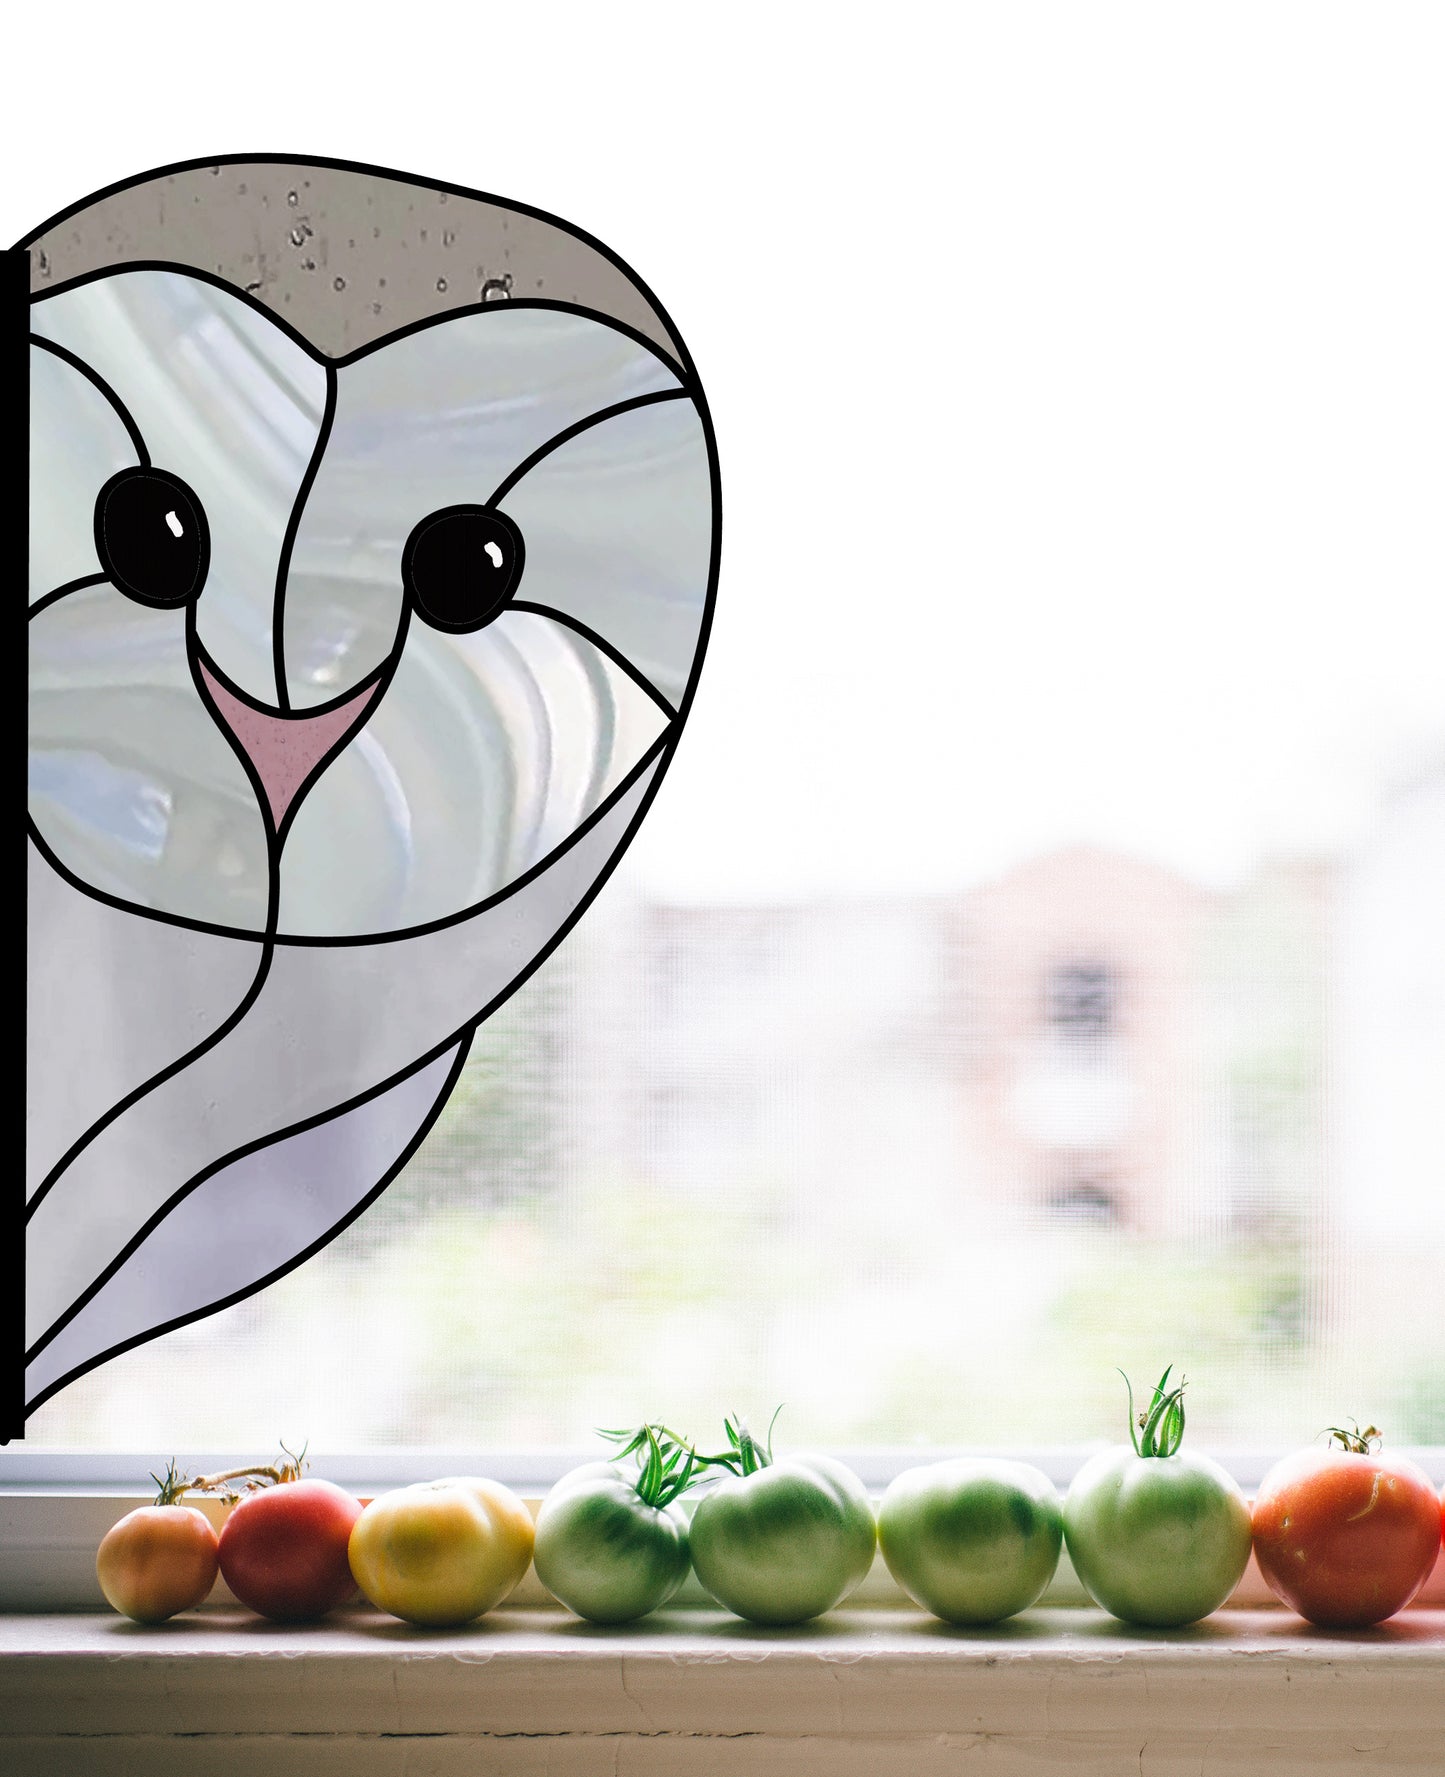 Snowy Owl Stained Glass Pattern